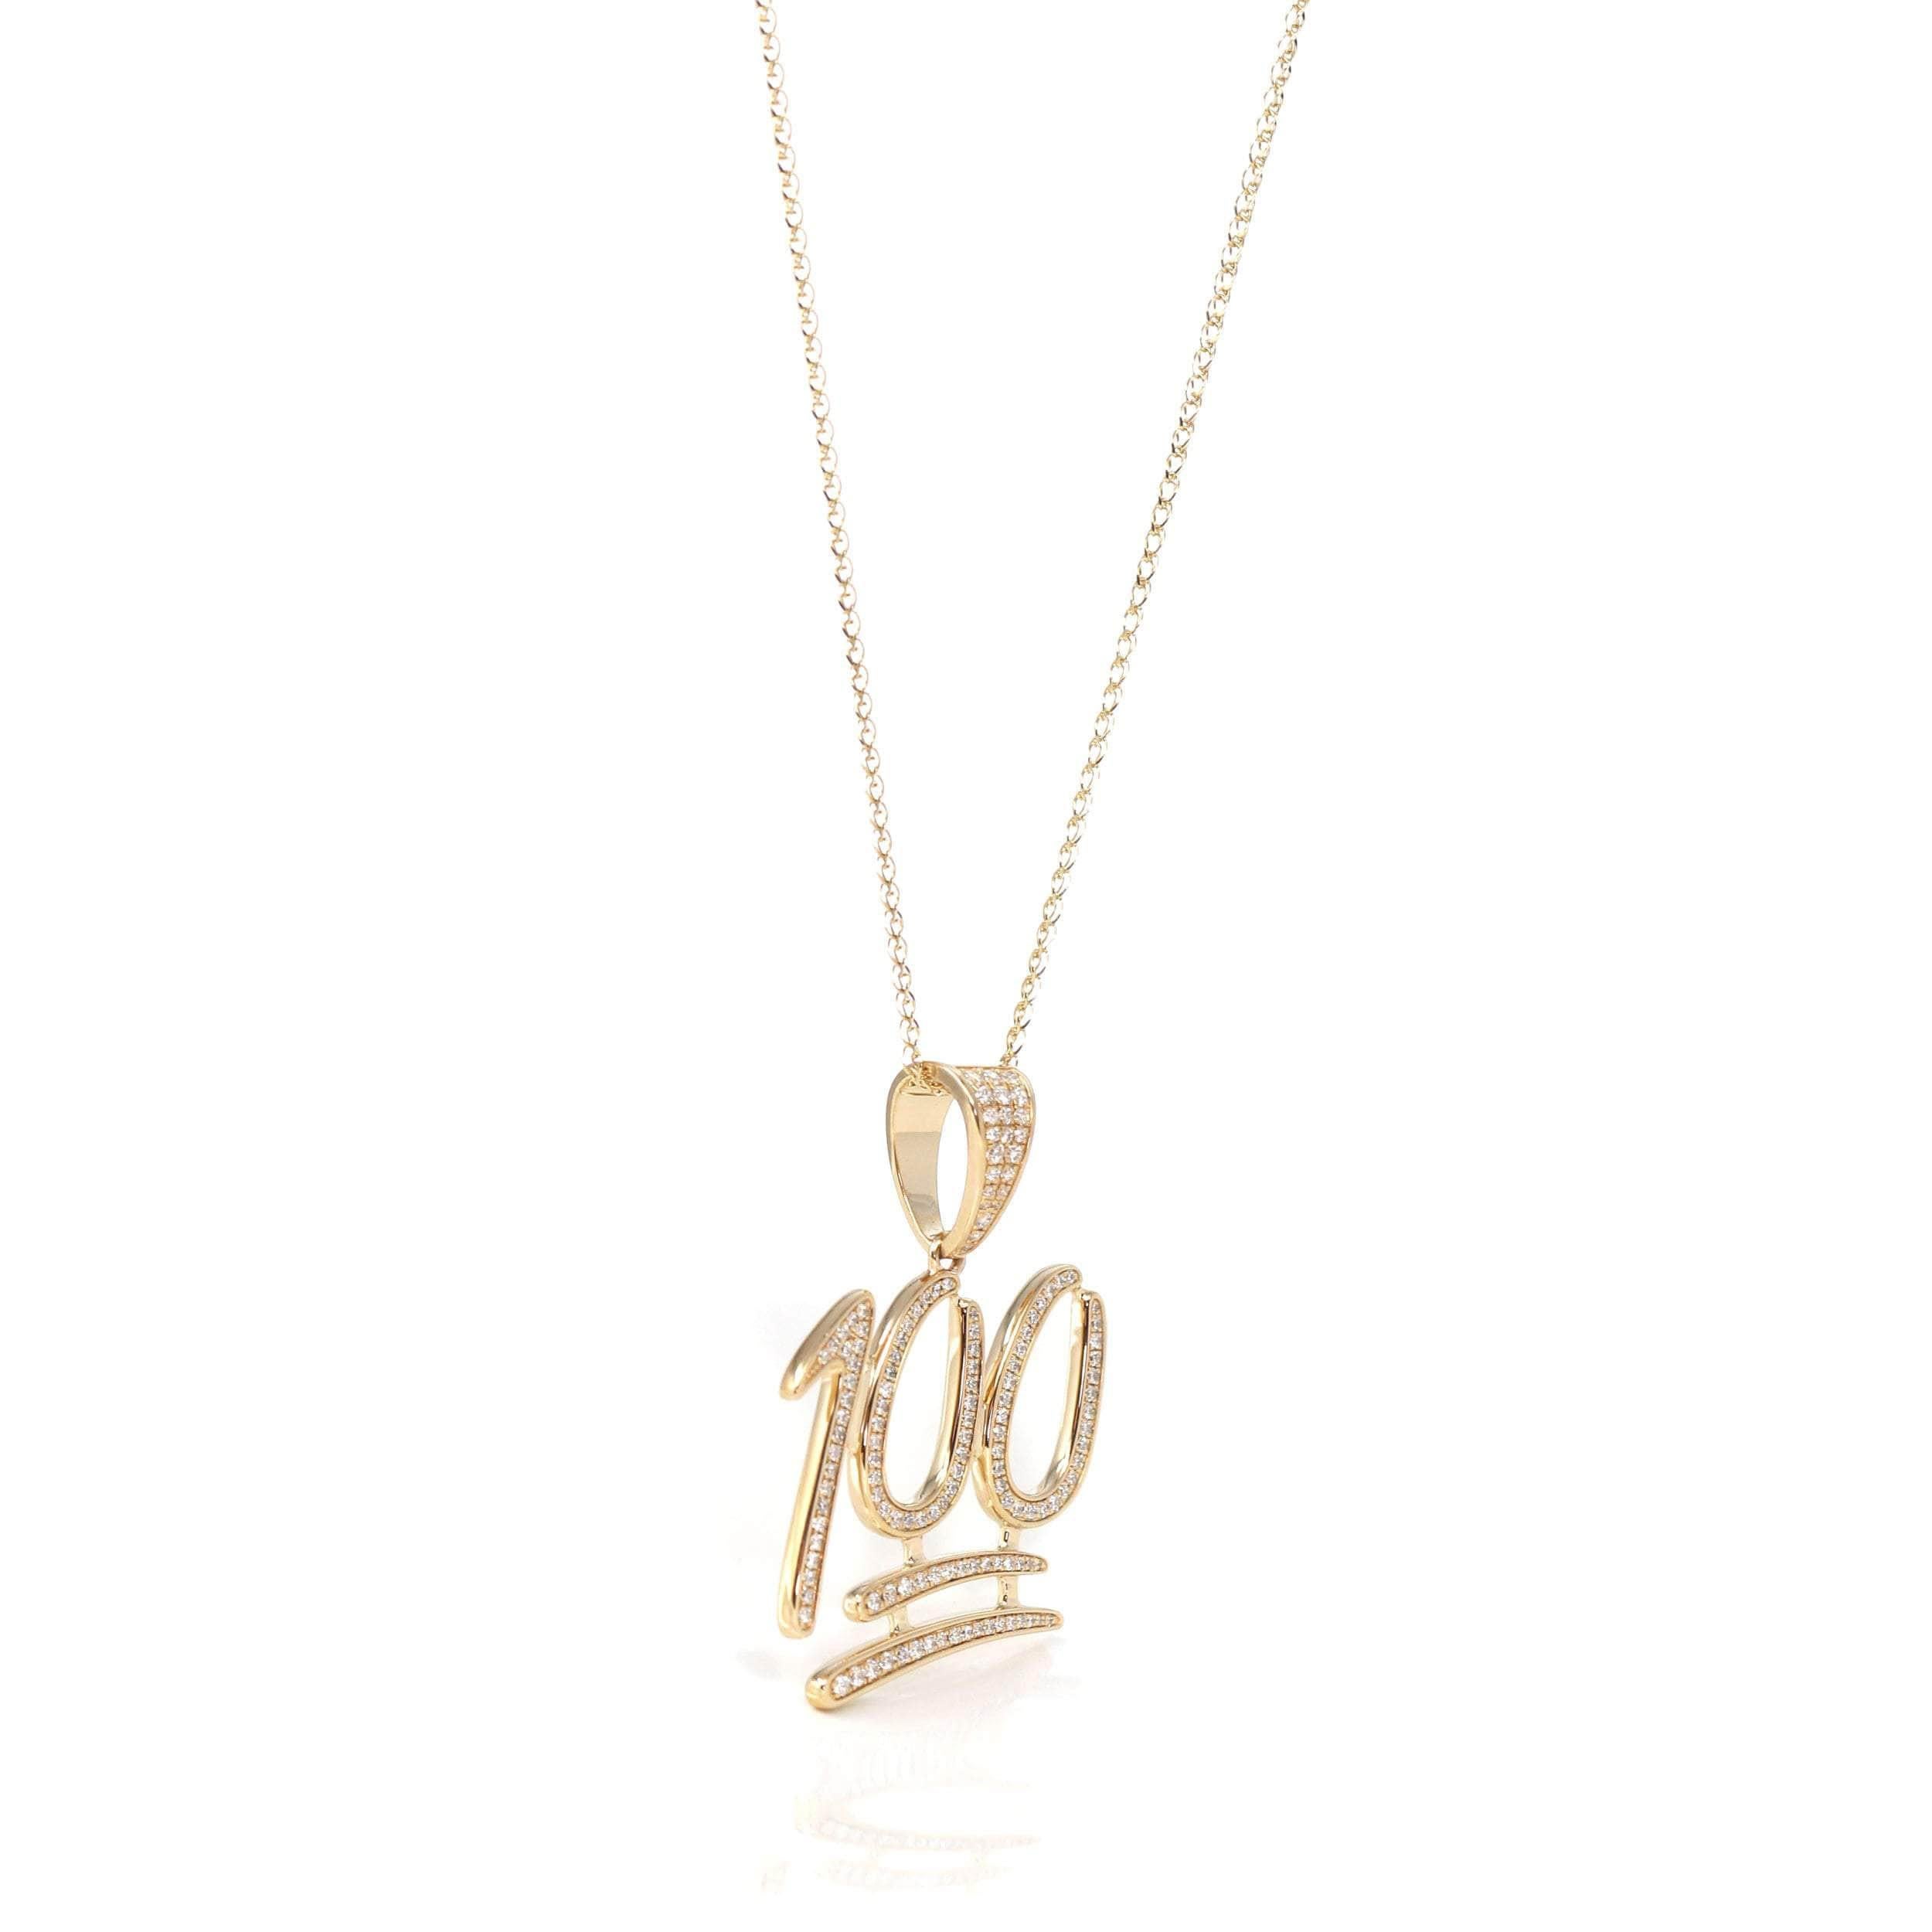 * INTRODUCTION----- This 100 pendant is made with 14K yellow gold with VS1 diamonds. It looks so royal and exquisite. The luxury yellow gold color stands out like no other. Every angles and line are so beautiful. It's an affordable gold gift for